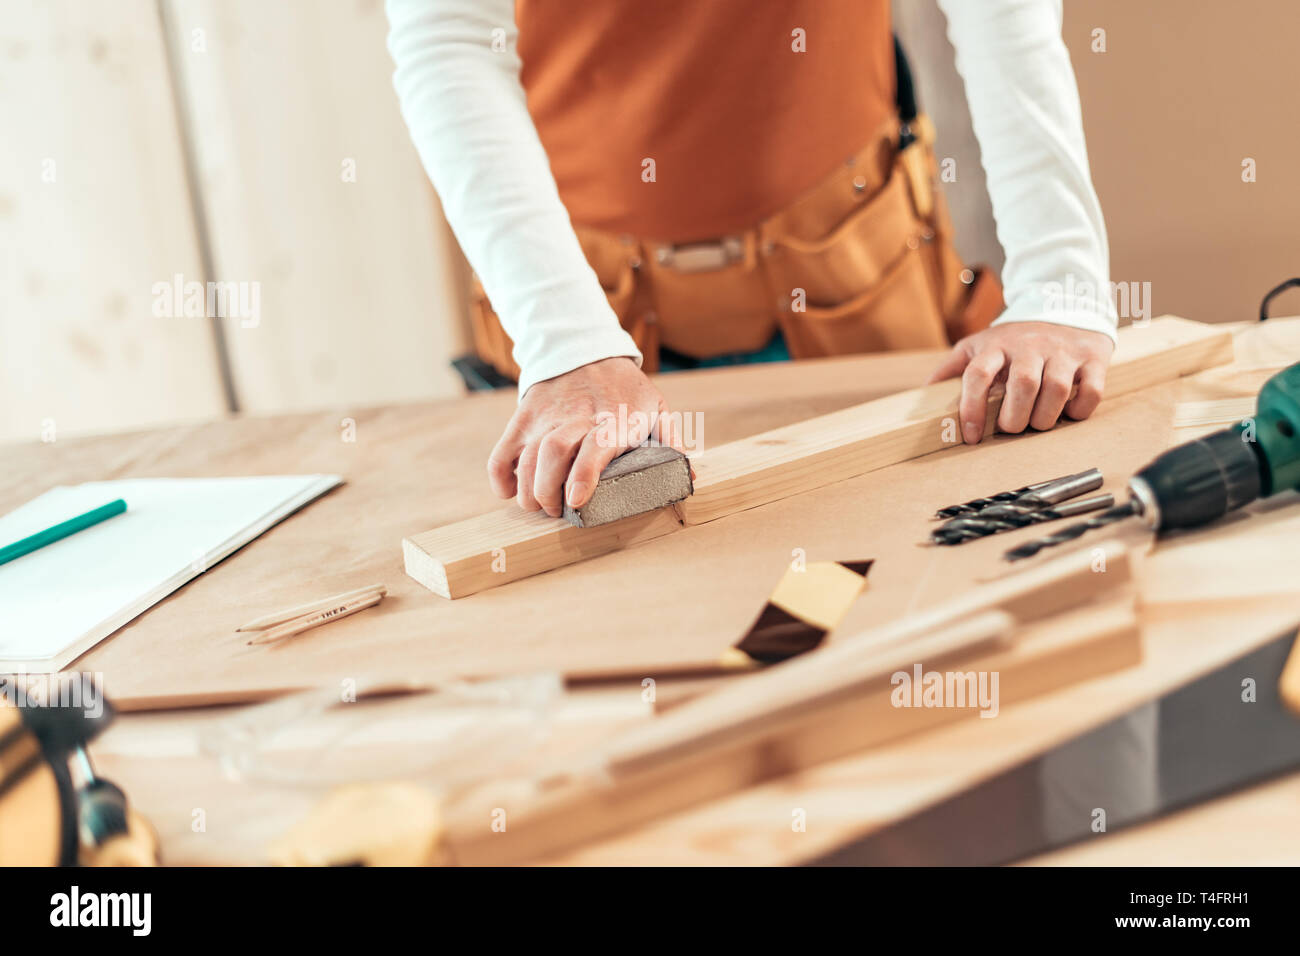 Female carpenter manually sanding wooden plank woth sponge sander in small business woodwork workshop, selective focus Stock Photo